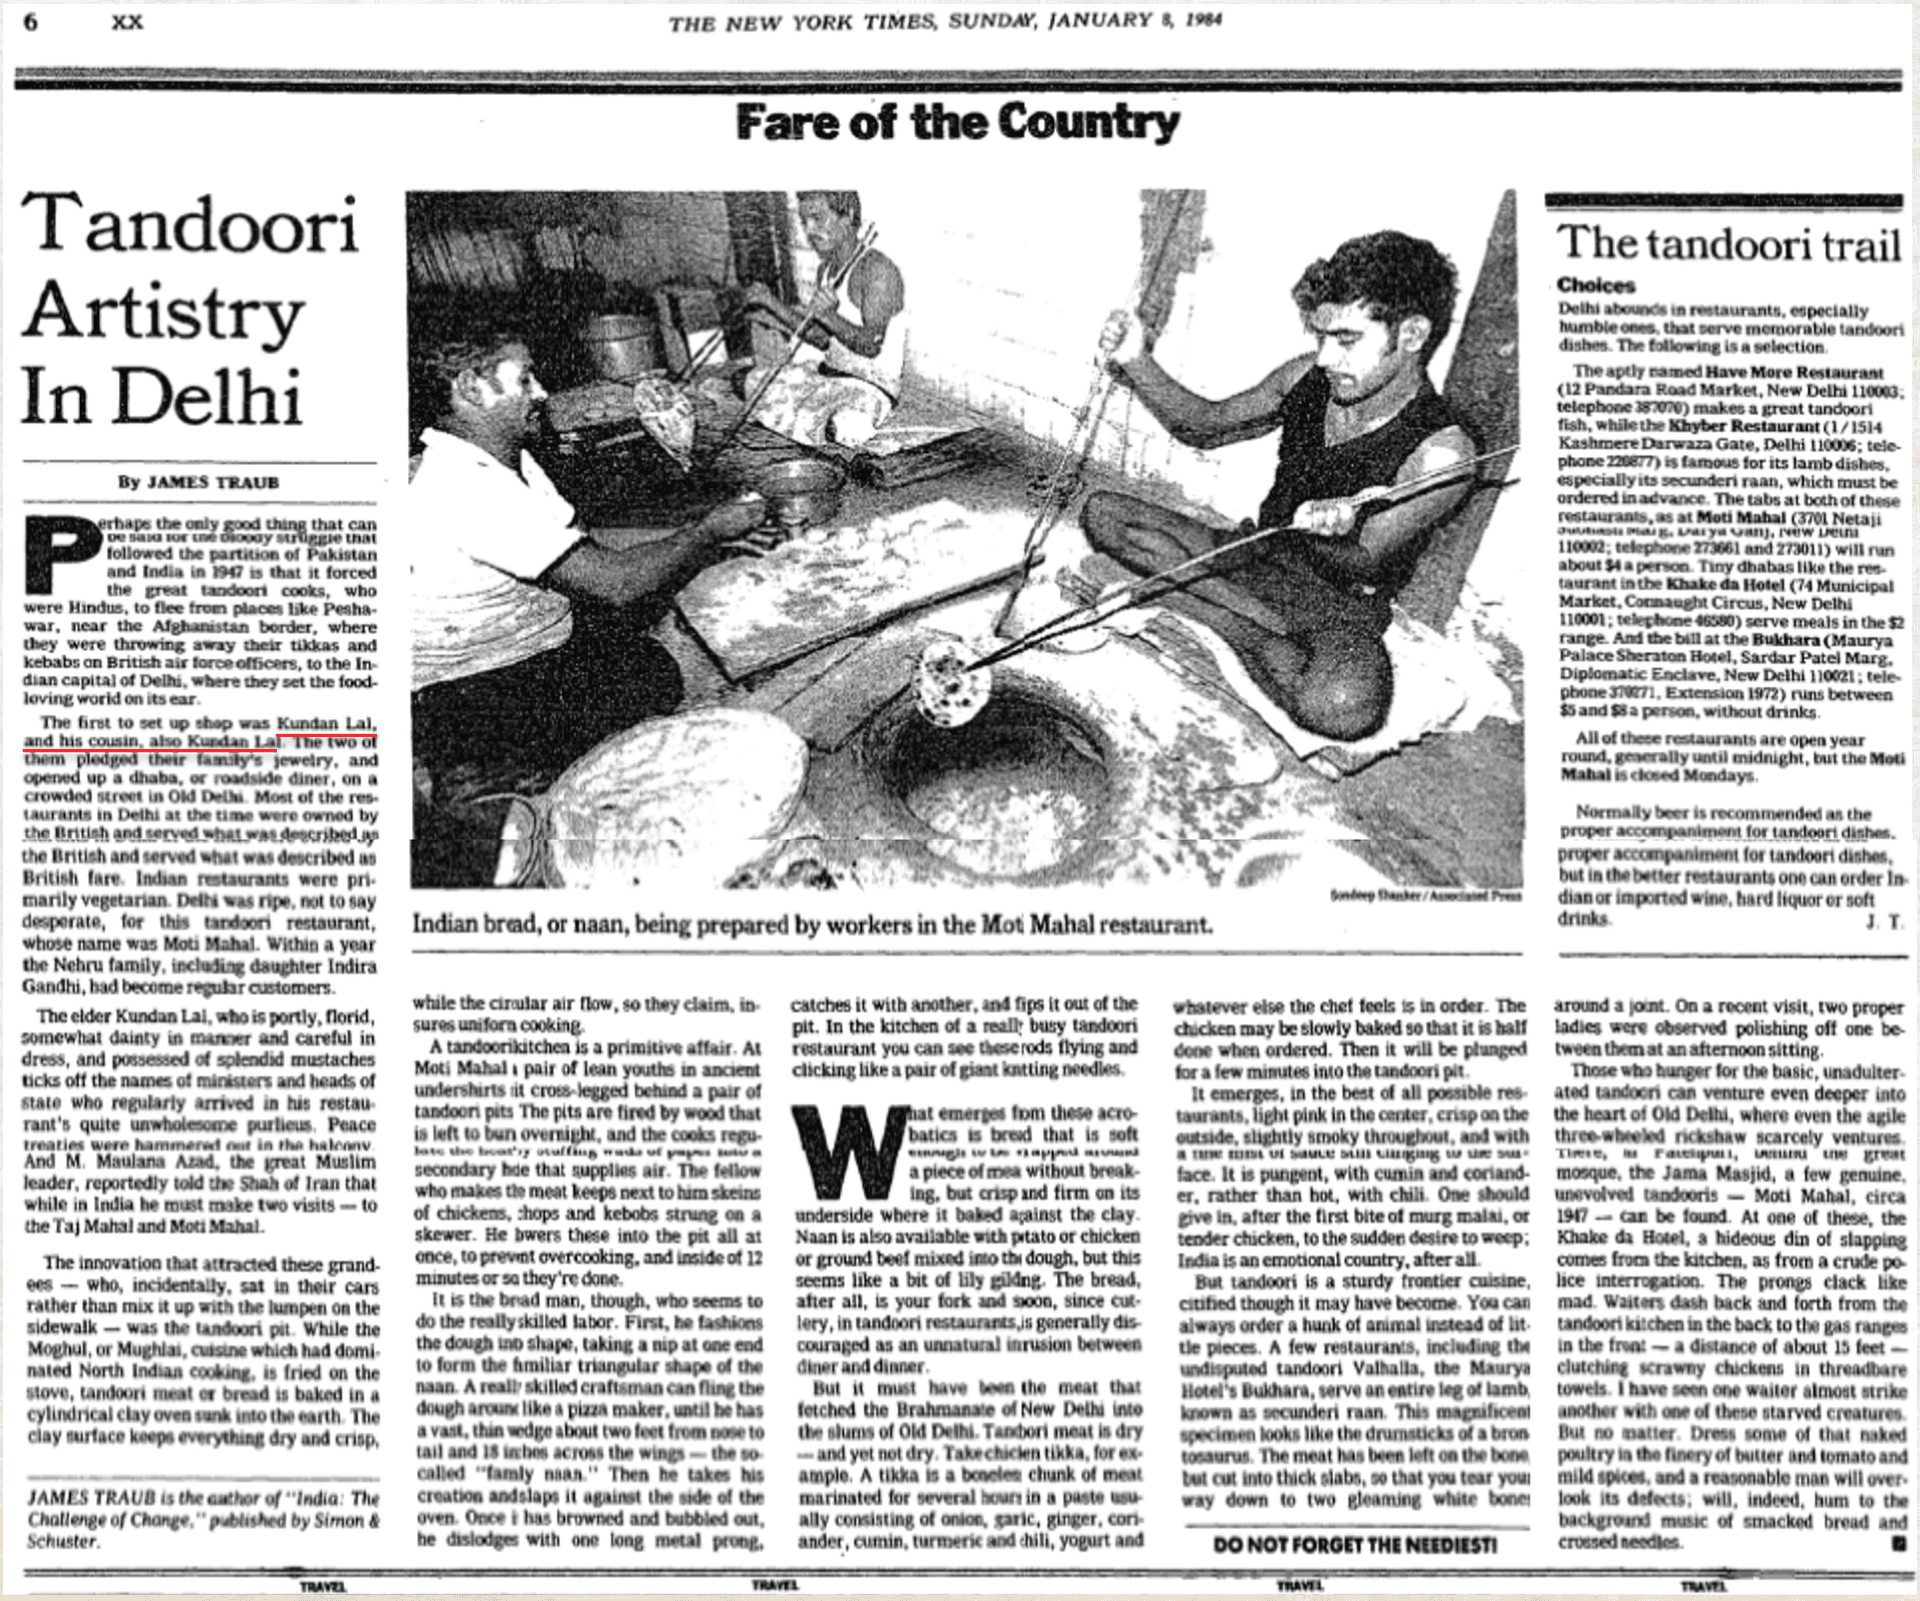 New York Times Article from 1984 about the Moti Mahal restaurant in Peshawar in present-day Pakistan founded by Kundan Lal Gujral and Kundan Lal Jaggi.